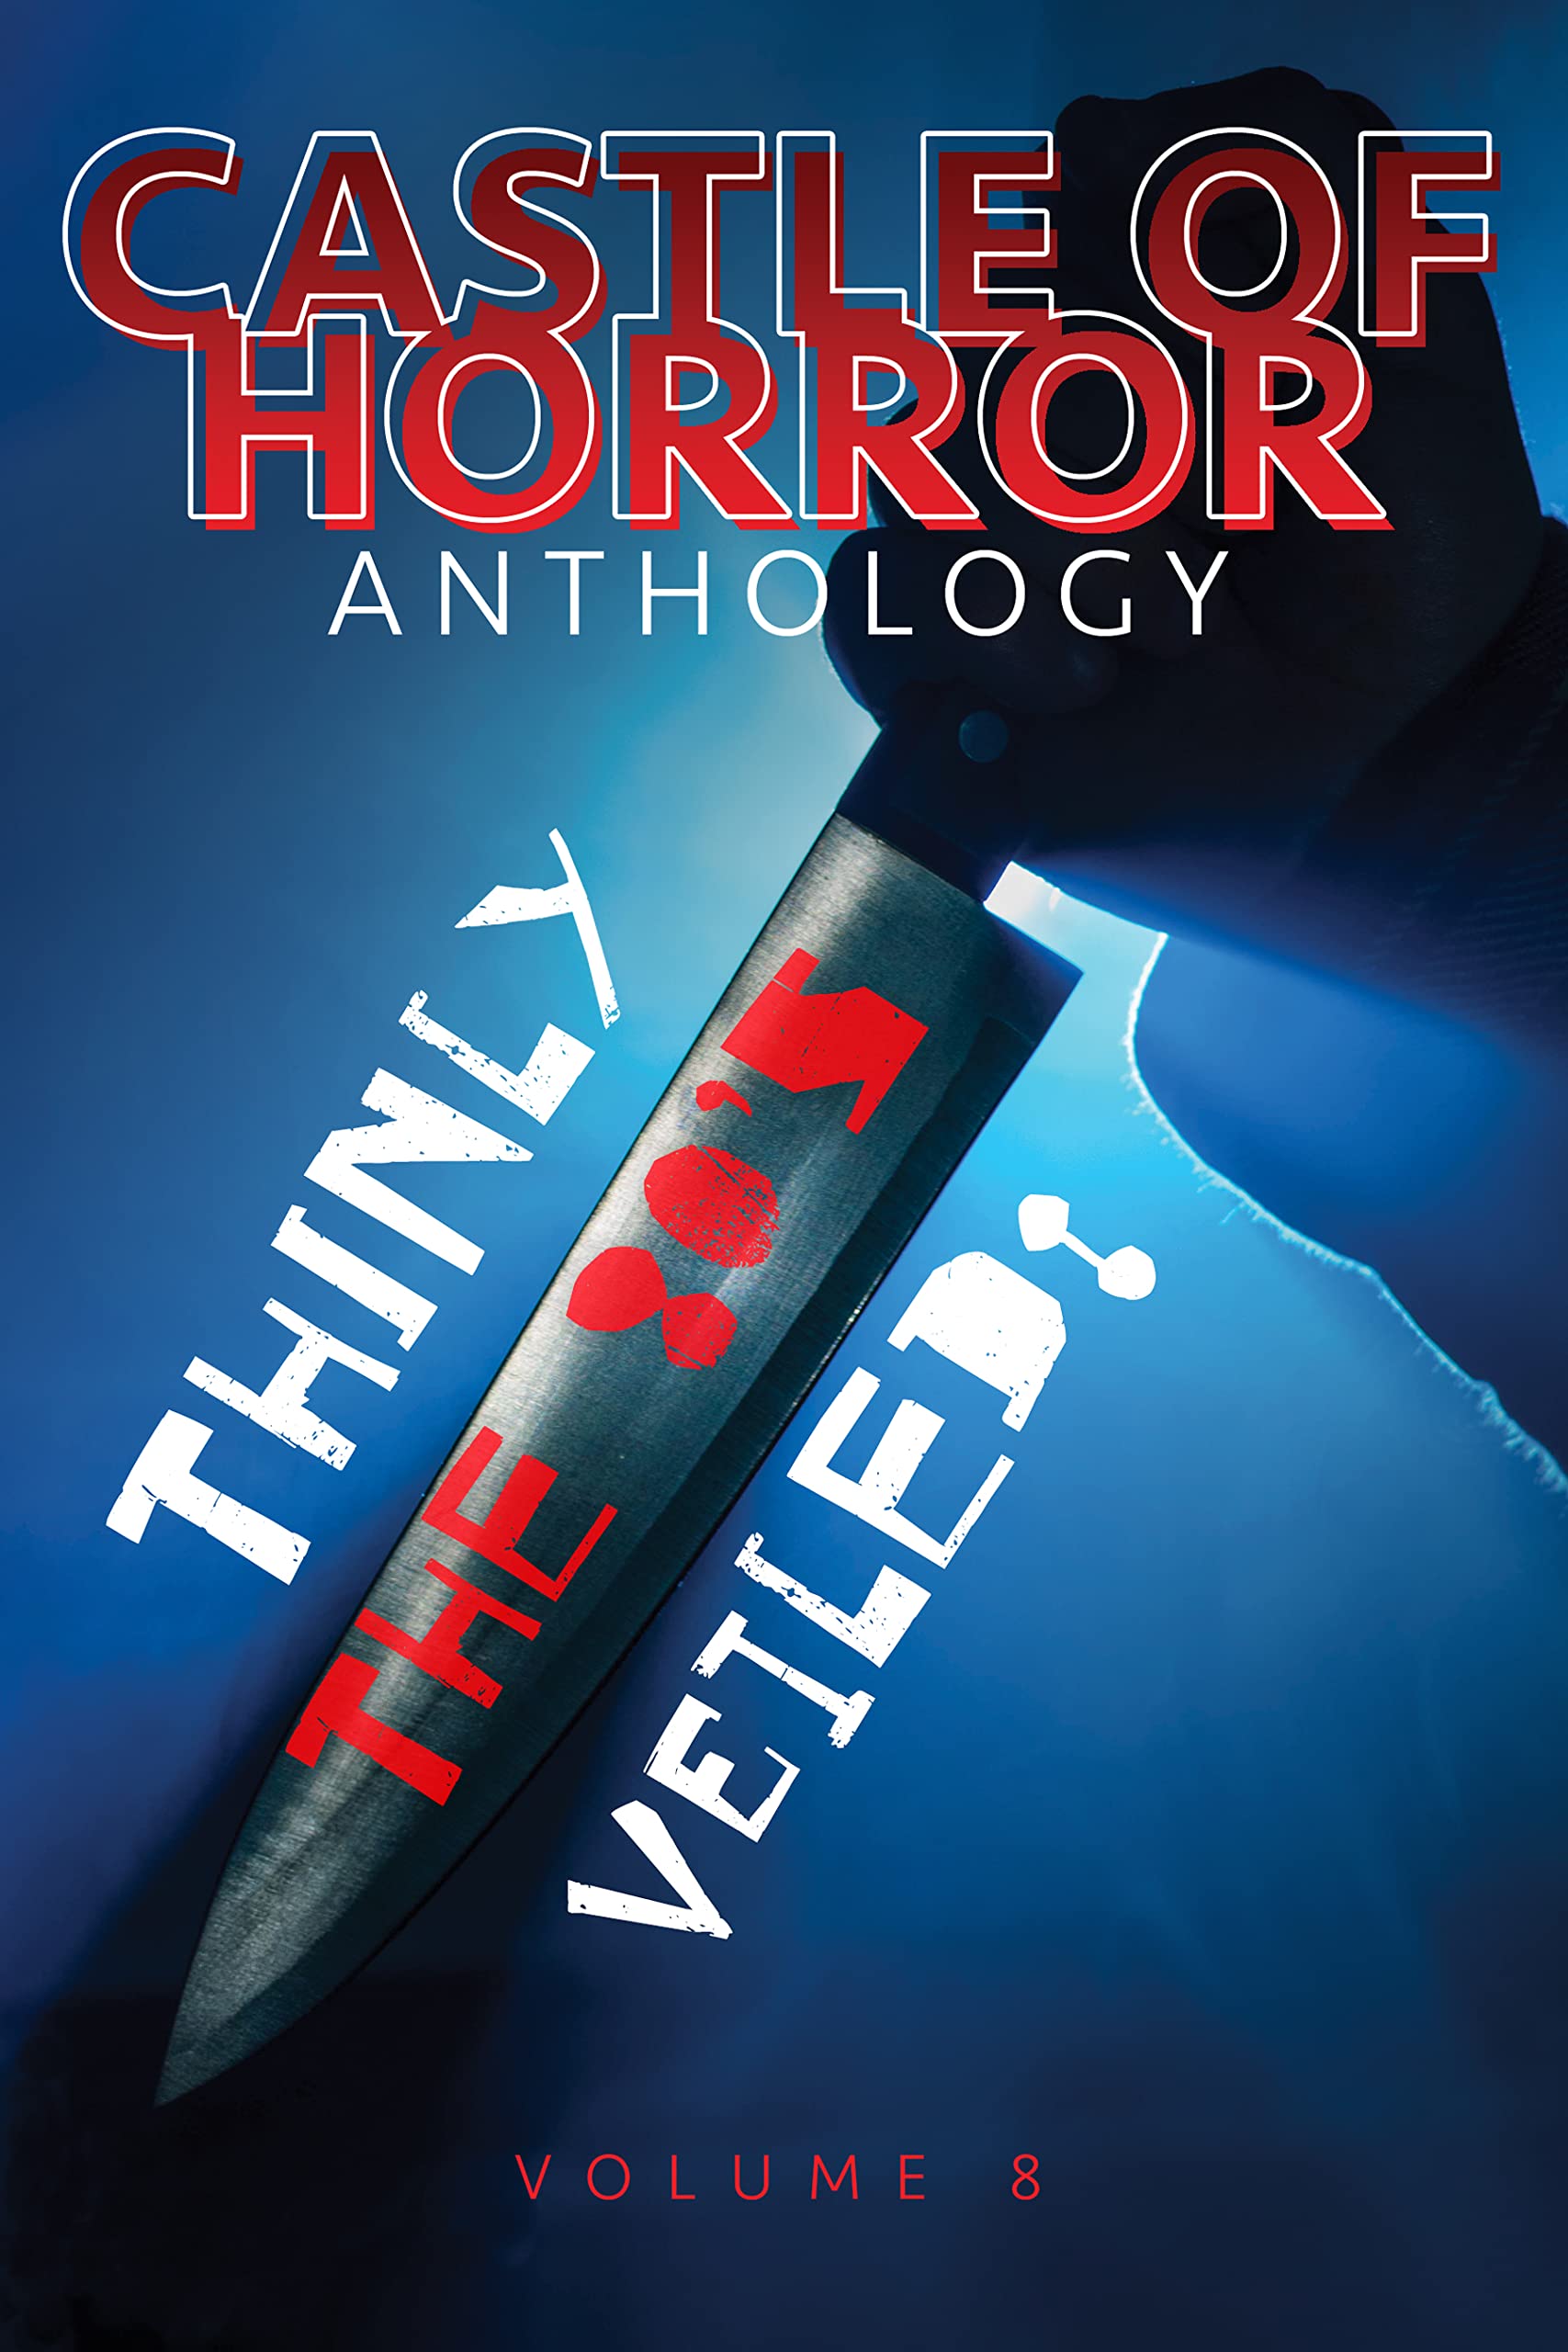 Castle of Horror Anthology Volume 8: Thinly Veiled: the 80s